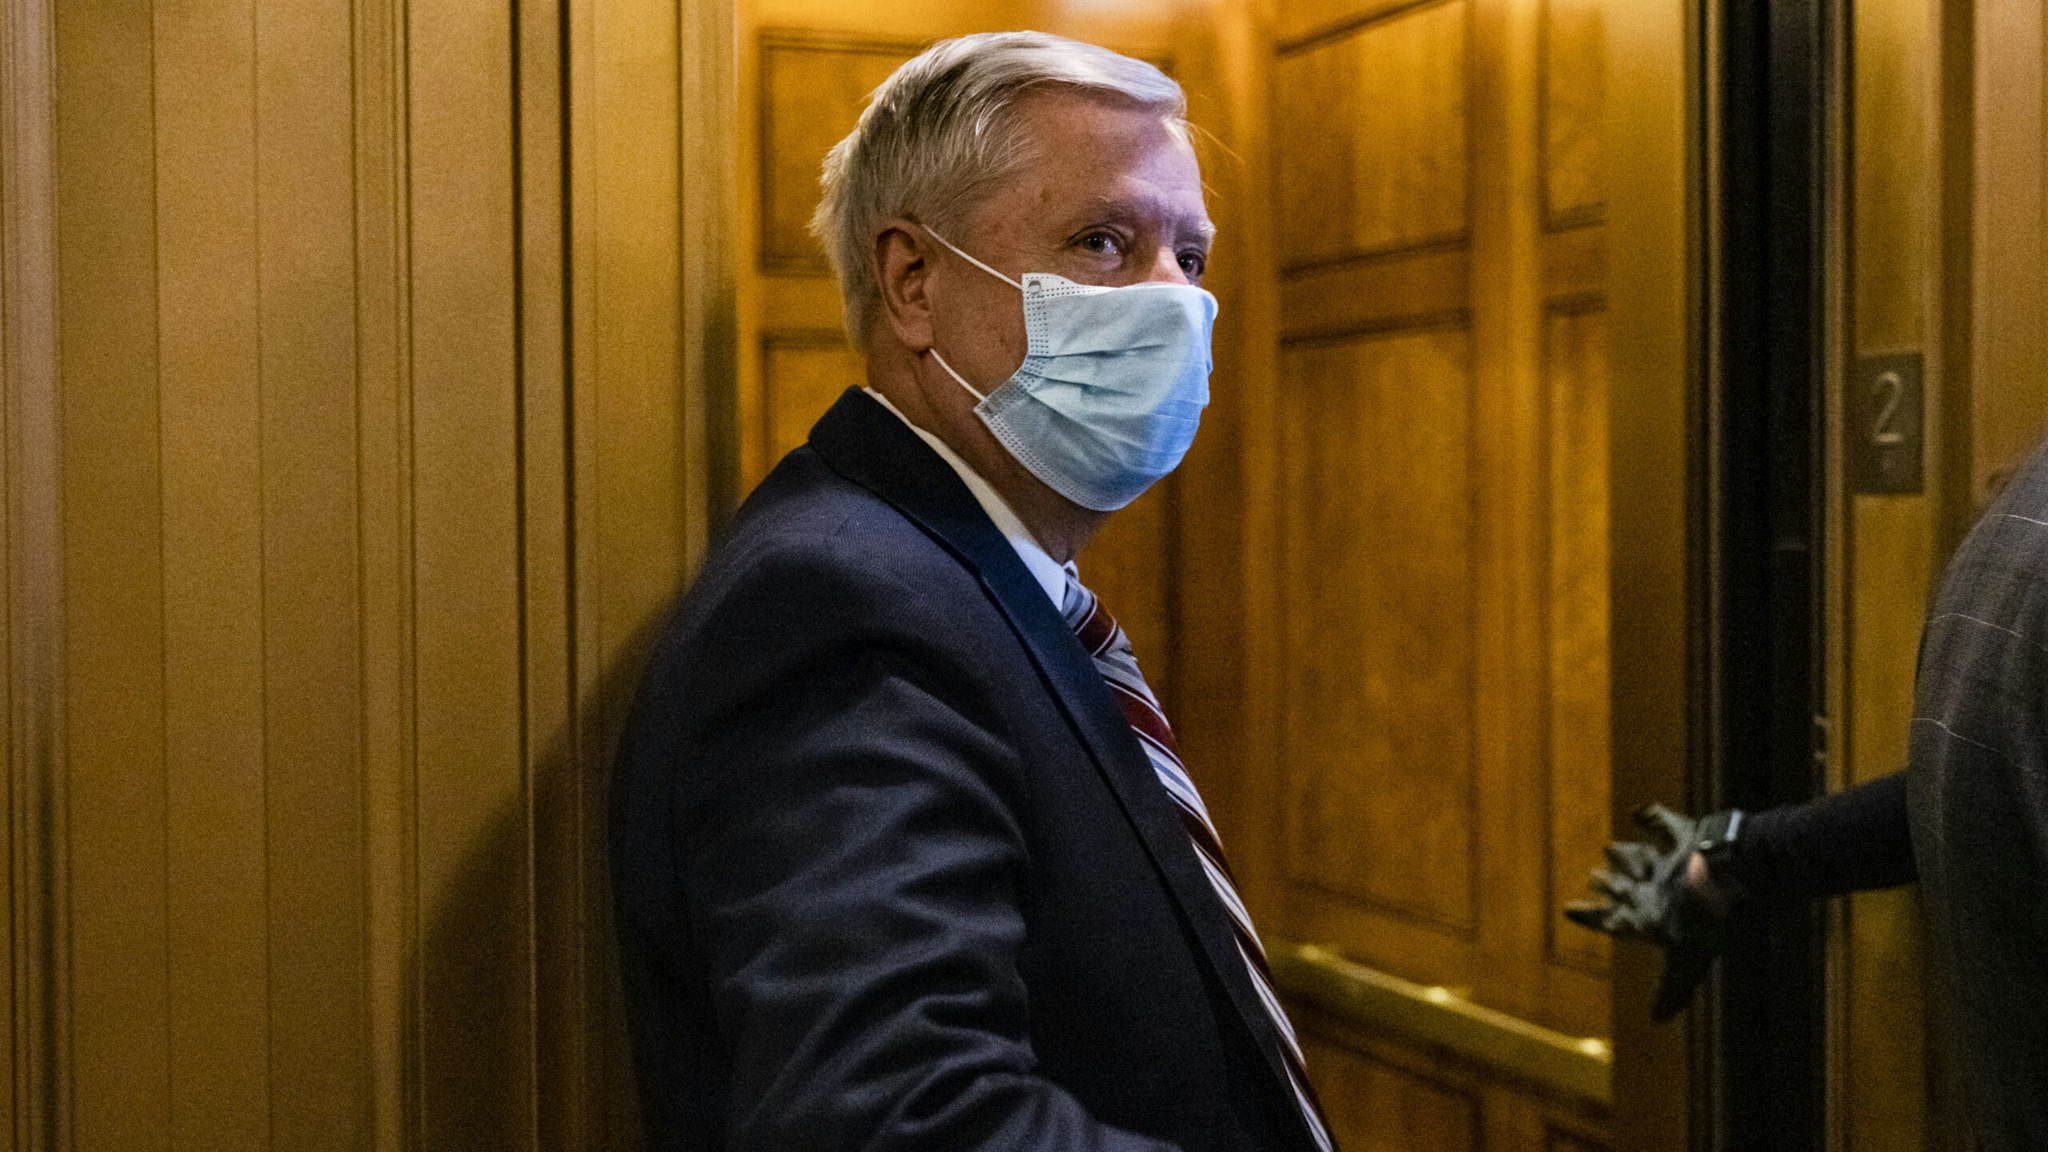 WASHINGTON, DC - JANUARY 26: Sen. Lindsey Graham (R-SC) leaves the floor of the Senate following a vote on January 26, 2021 in Washington, DC. Today senators will be sworn in as the jury for the second impeachment trial of former President Donald Trump. Senate President pro tempore Patrick Leahy (D-VT) will preside over the trial in place of Supreme Court Chief Justice John Roberts.